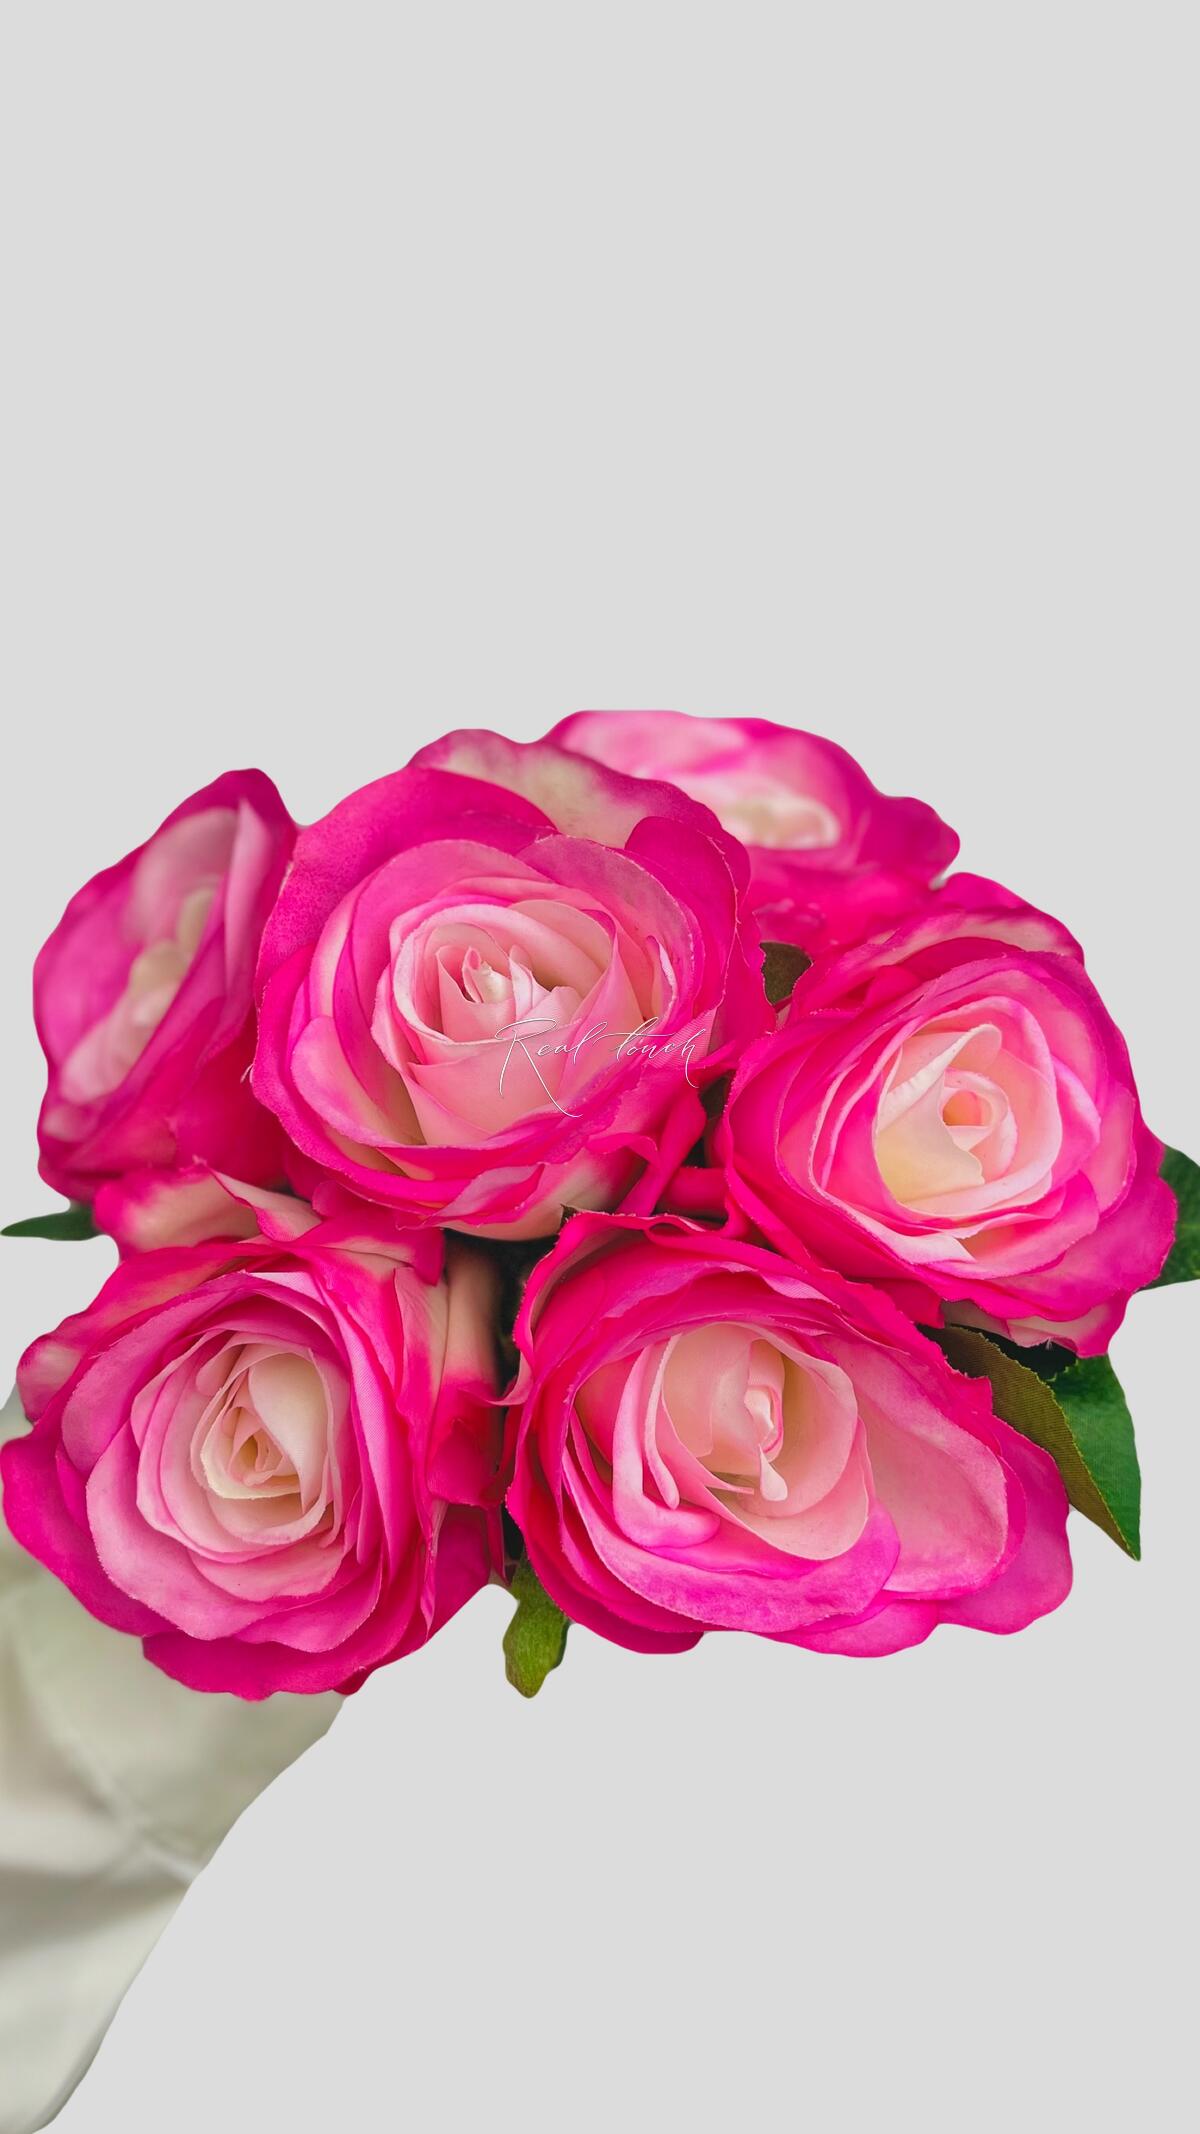  Northlight Set of 6 Real Touch Artificial Rose Stems